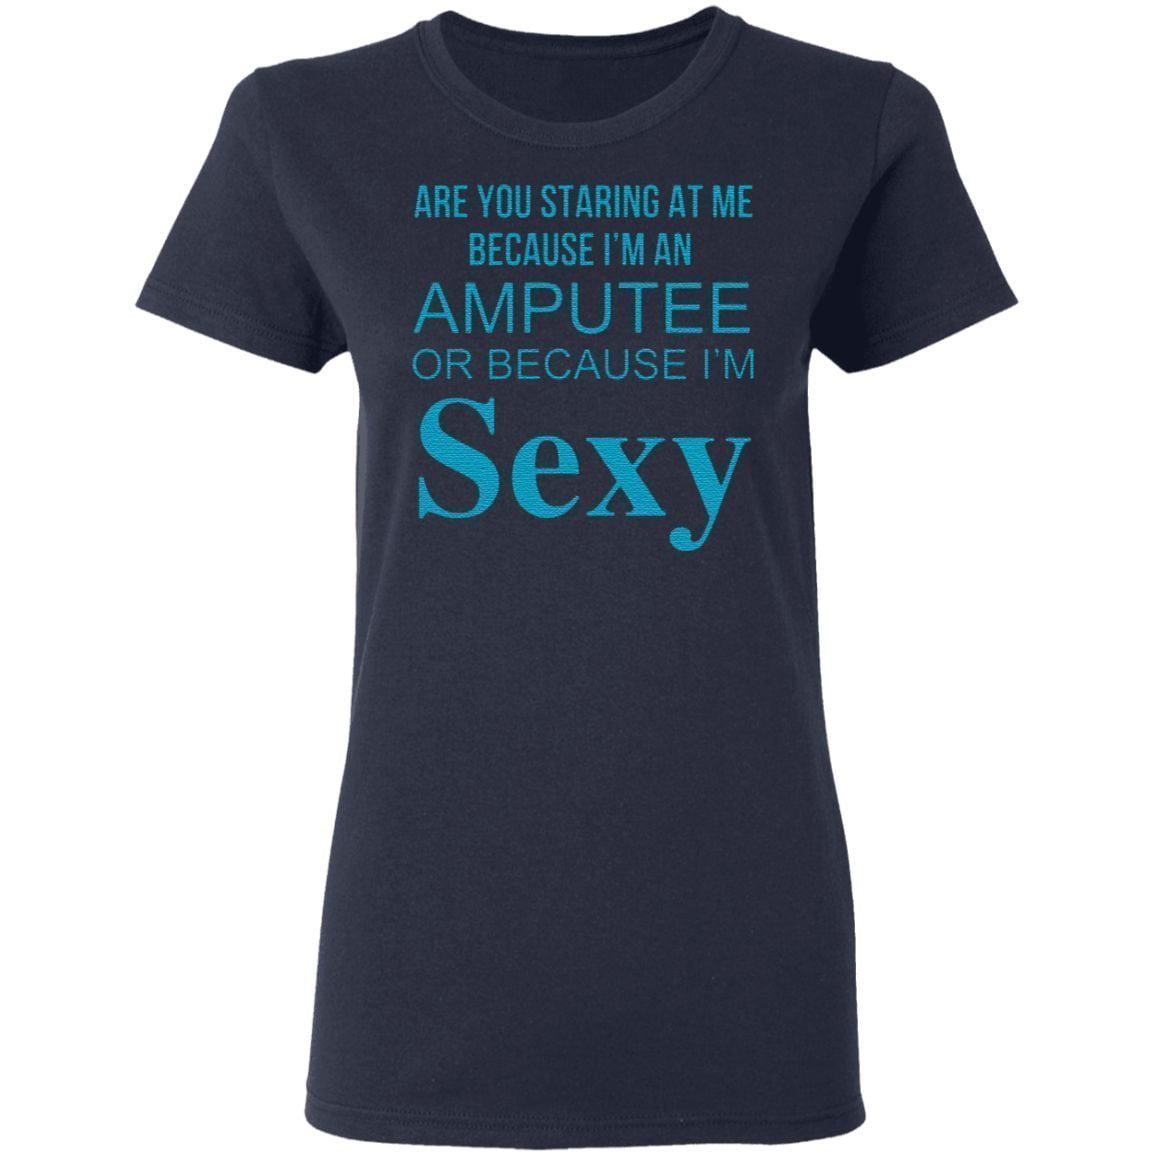 Are You Staring At Me Because I Am An Amputee Or Because I Am Sexy T Shirt